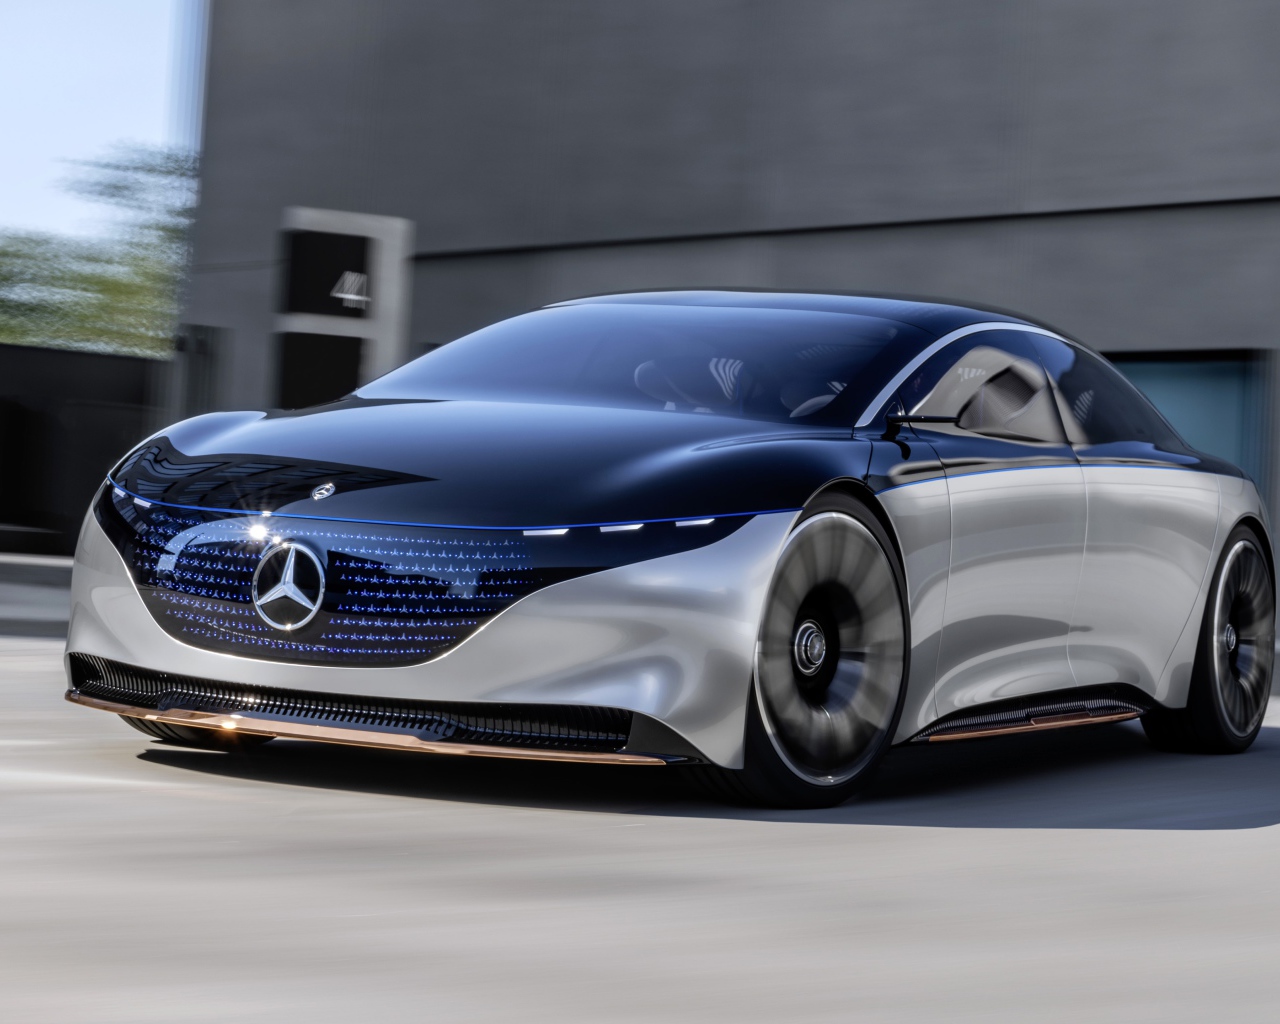 2019 Mercedes-Benz Vision EQS at the gray building